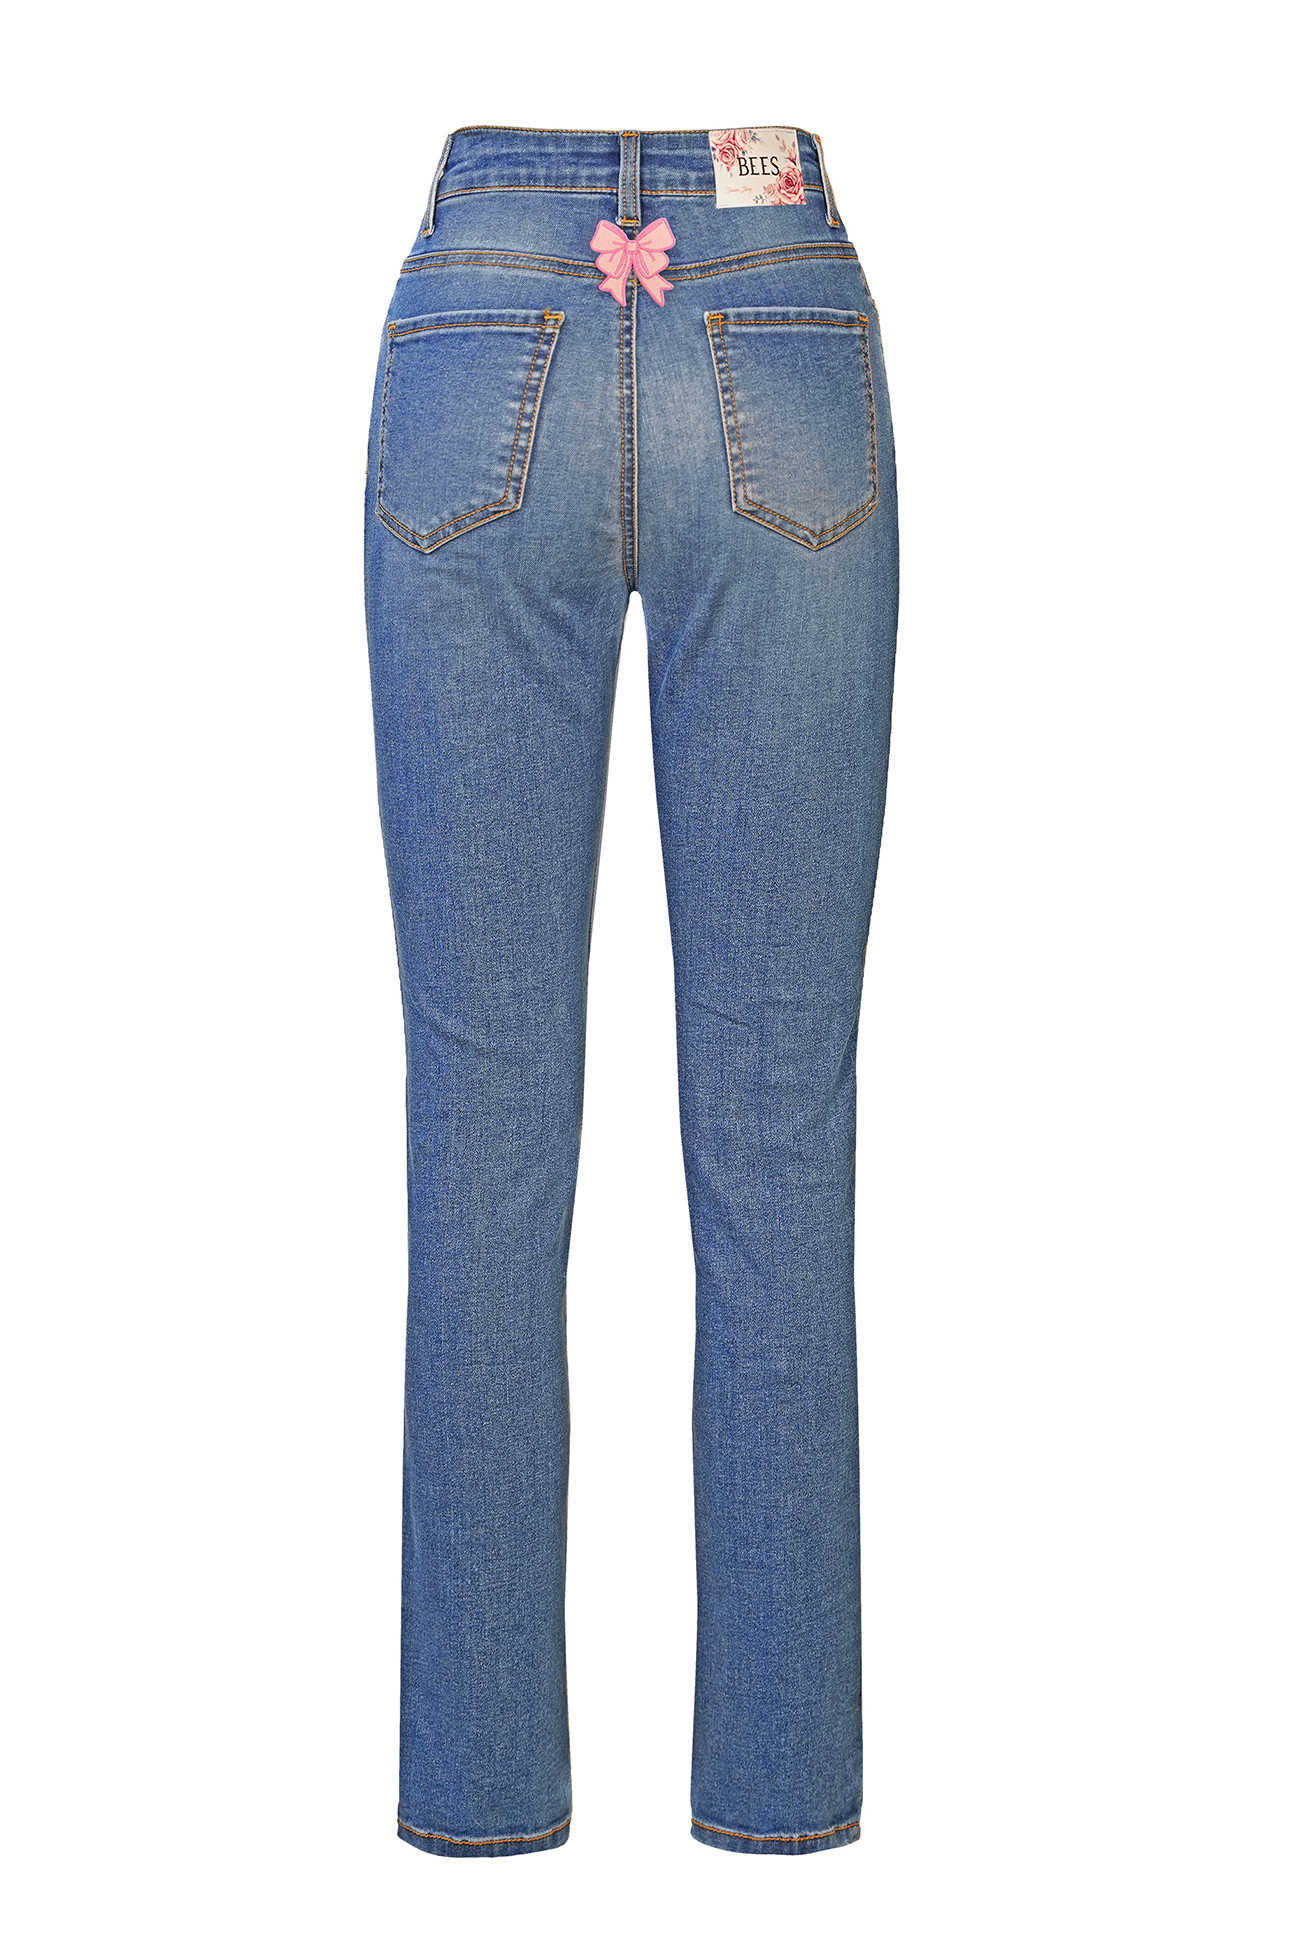 Bees - Iconic Jeans con fiocco, Denim, large image number 1